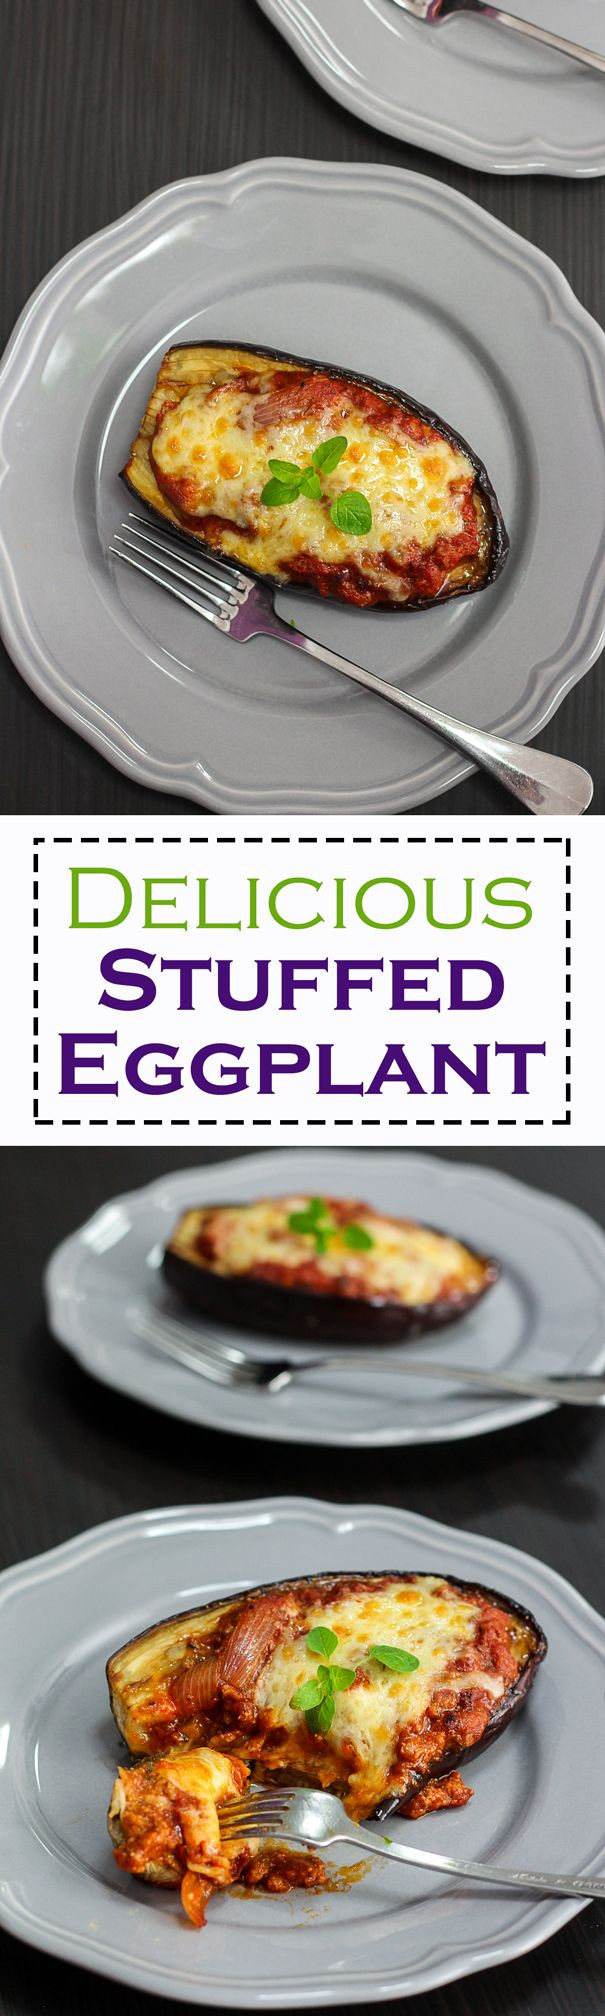 Healthy Eggplant Recipes For Dinner
 This Delicious Stuffed Eggplant makes a satisfying and